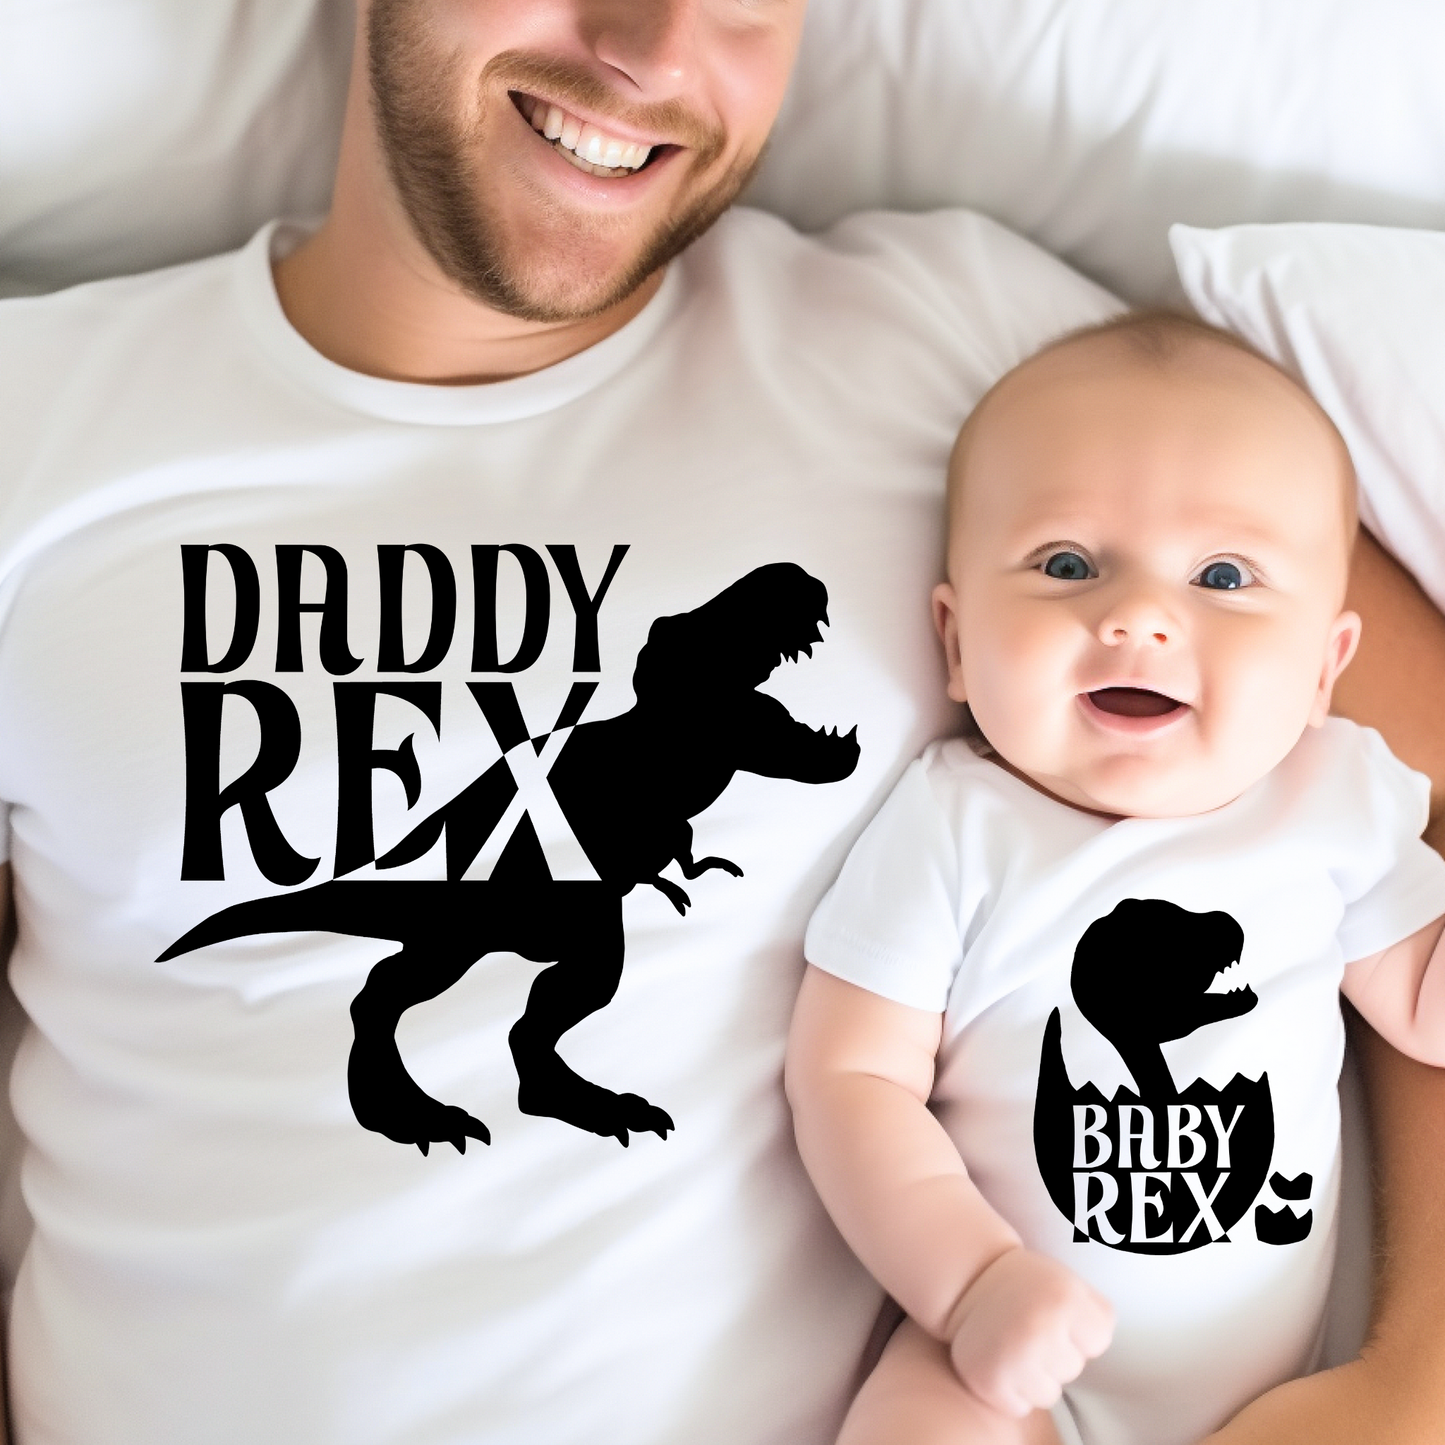 T-Rex Dinosaur - Father and Baby Shirts